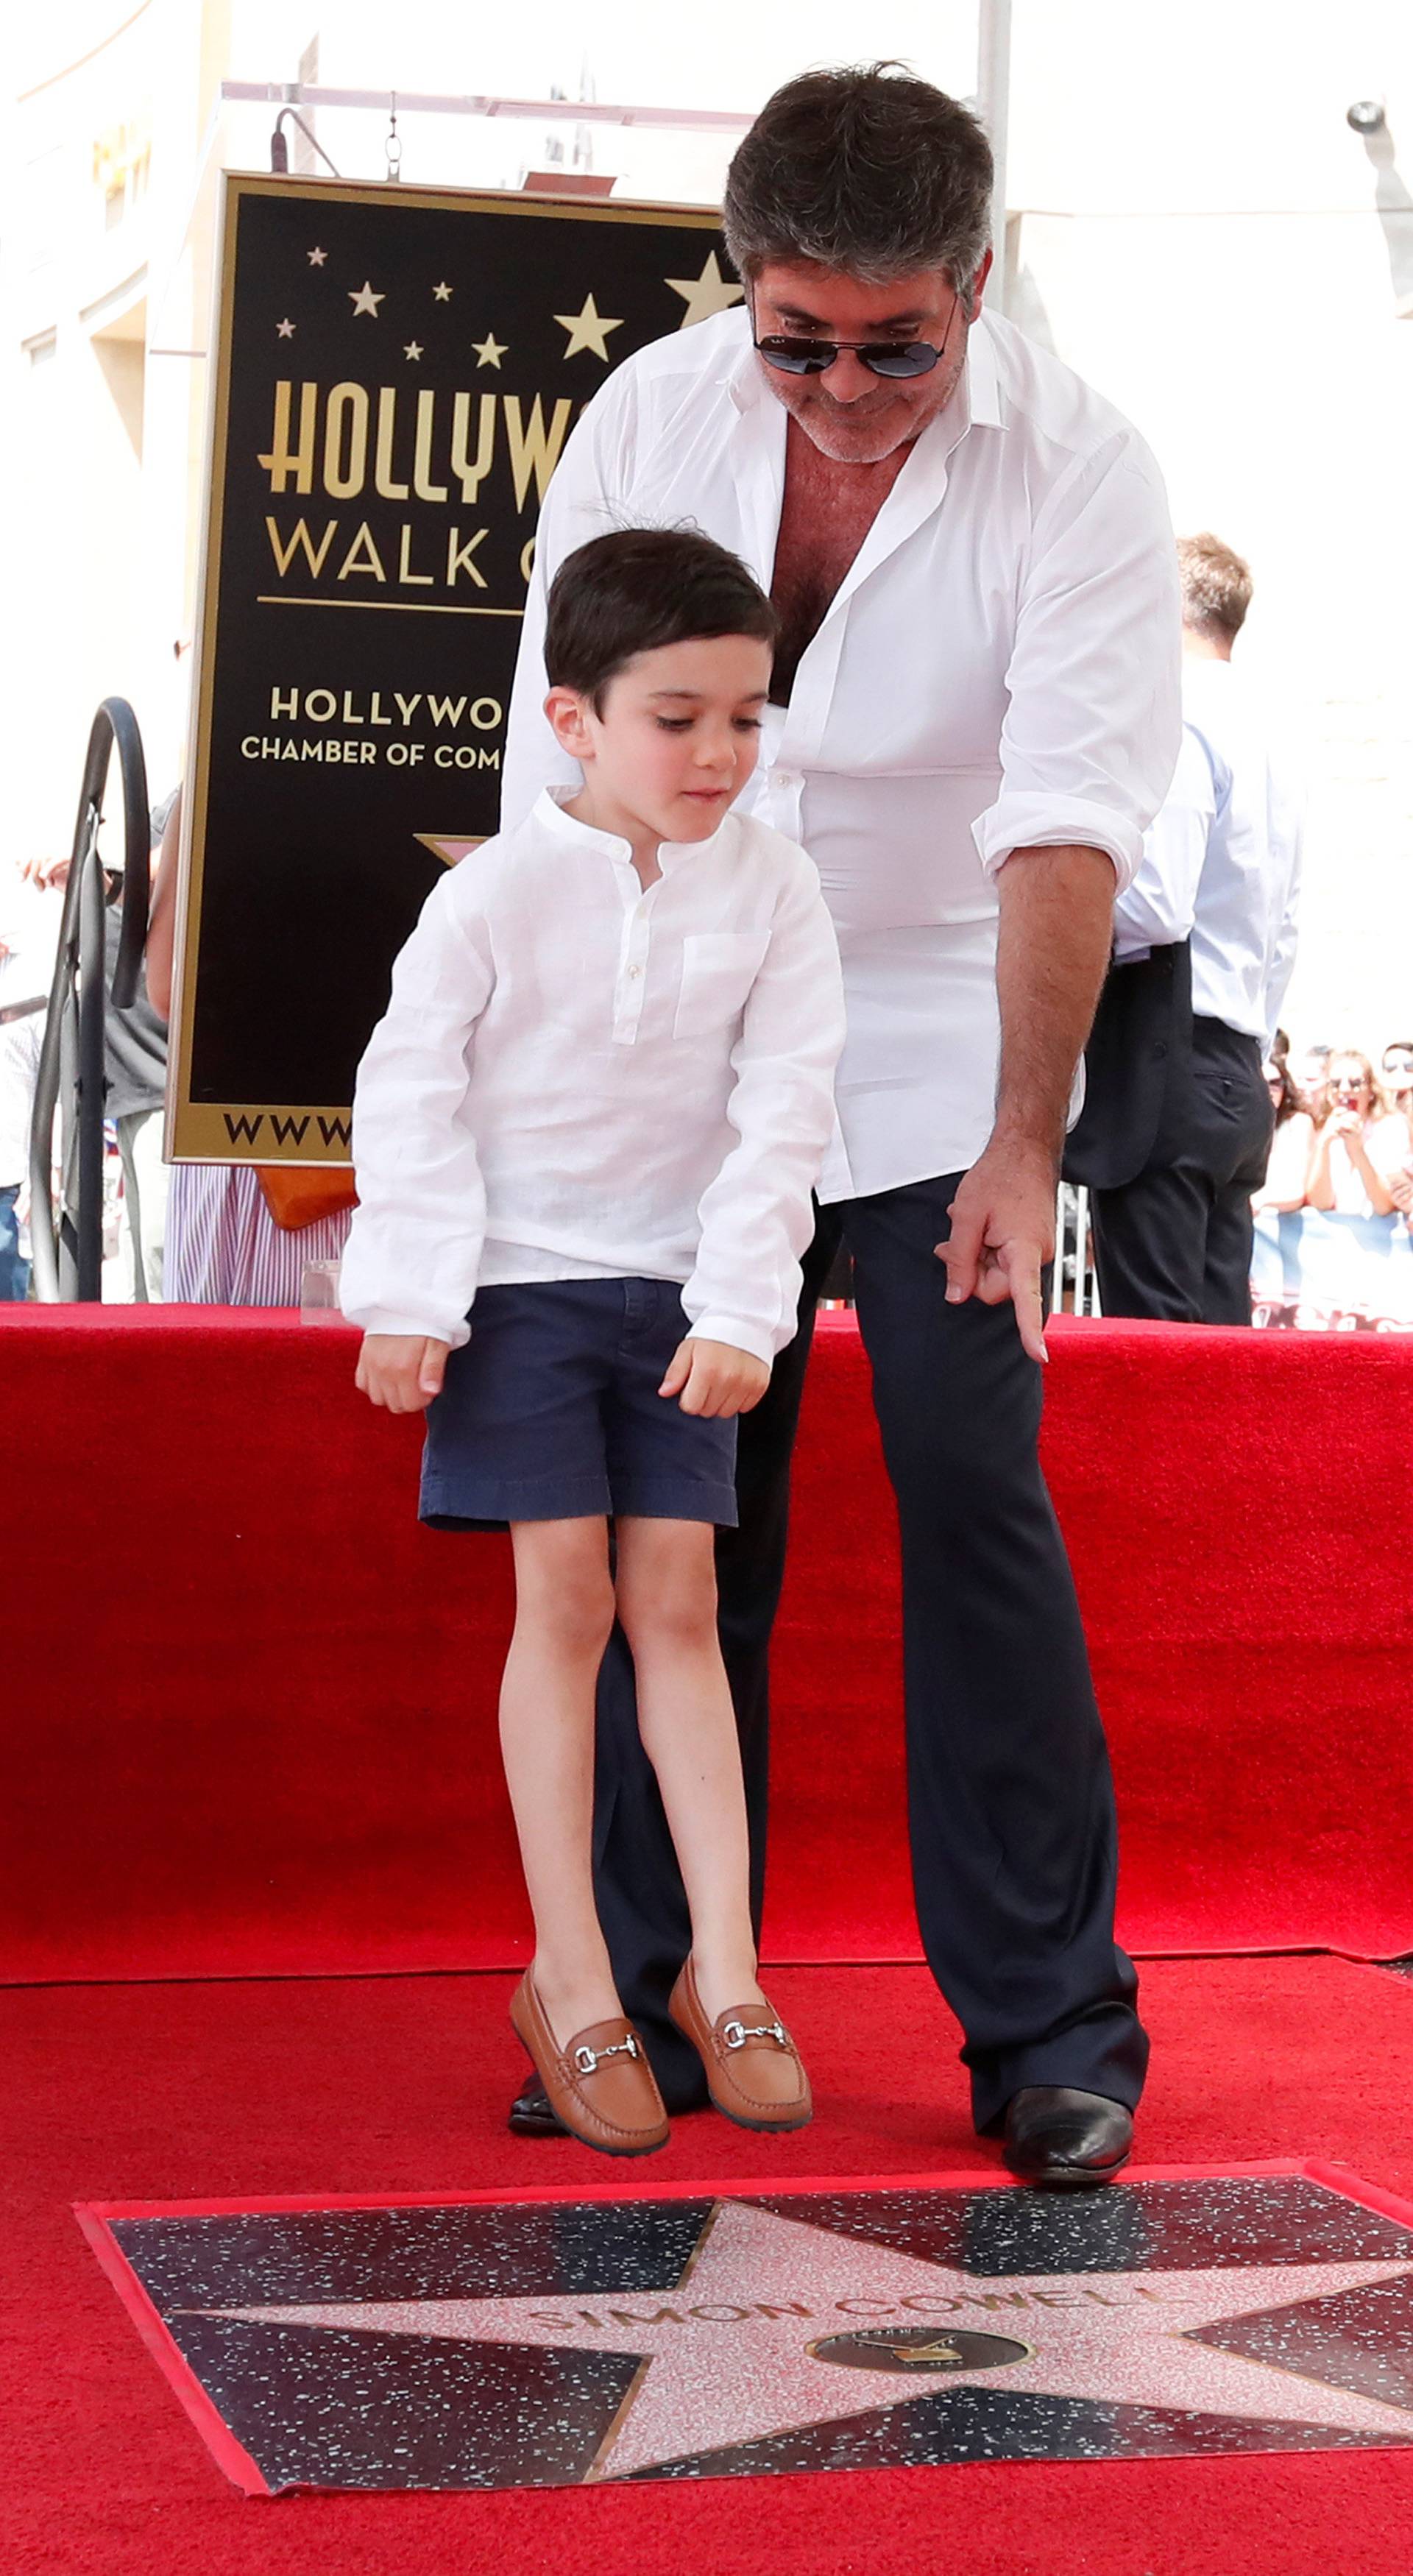 Television producer Cowell and his son Eric pose on his star on the Hollywood Walk of Fame in Los Angeles